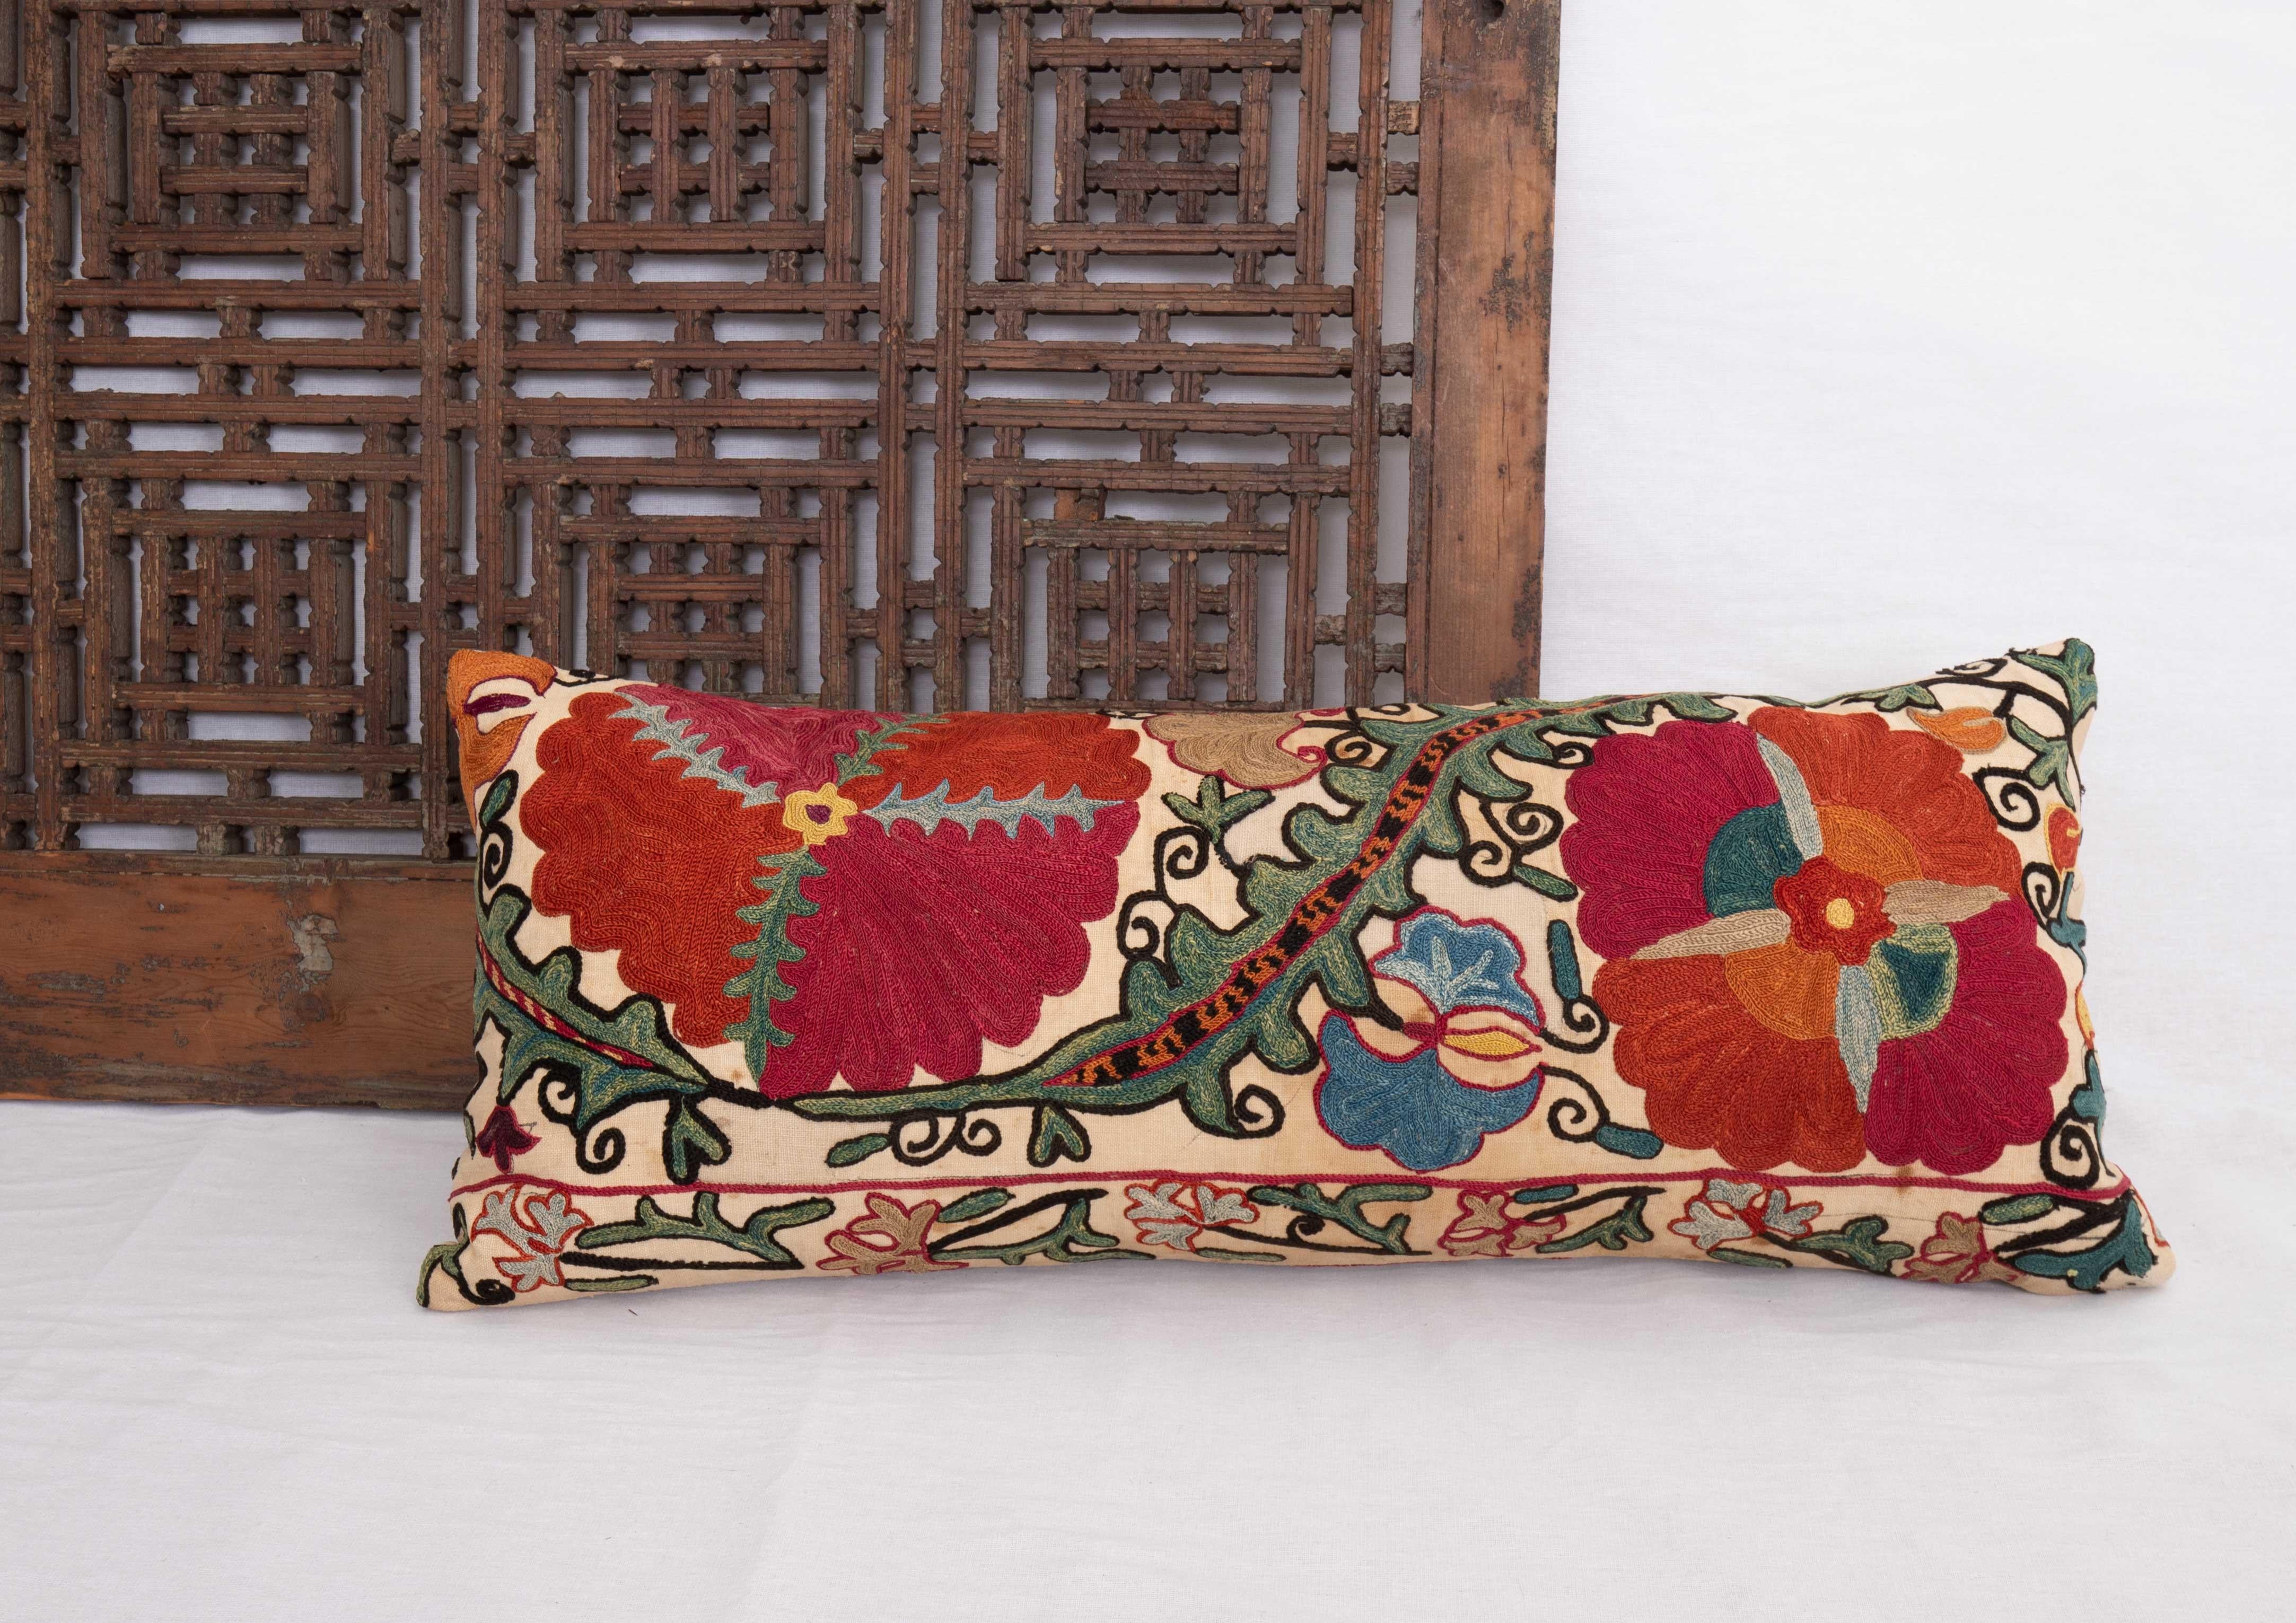 Suzani Pillow Case Made from an Antique Suzani Fragment, 19th C 1